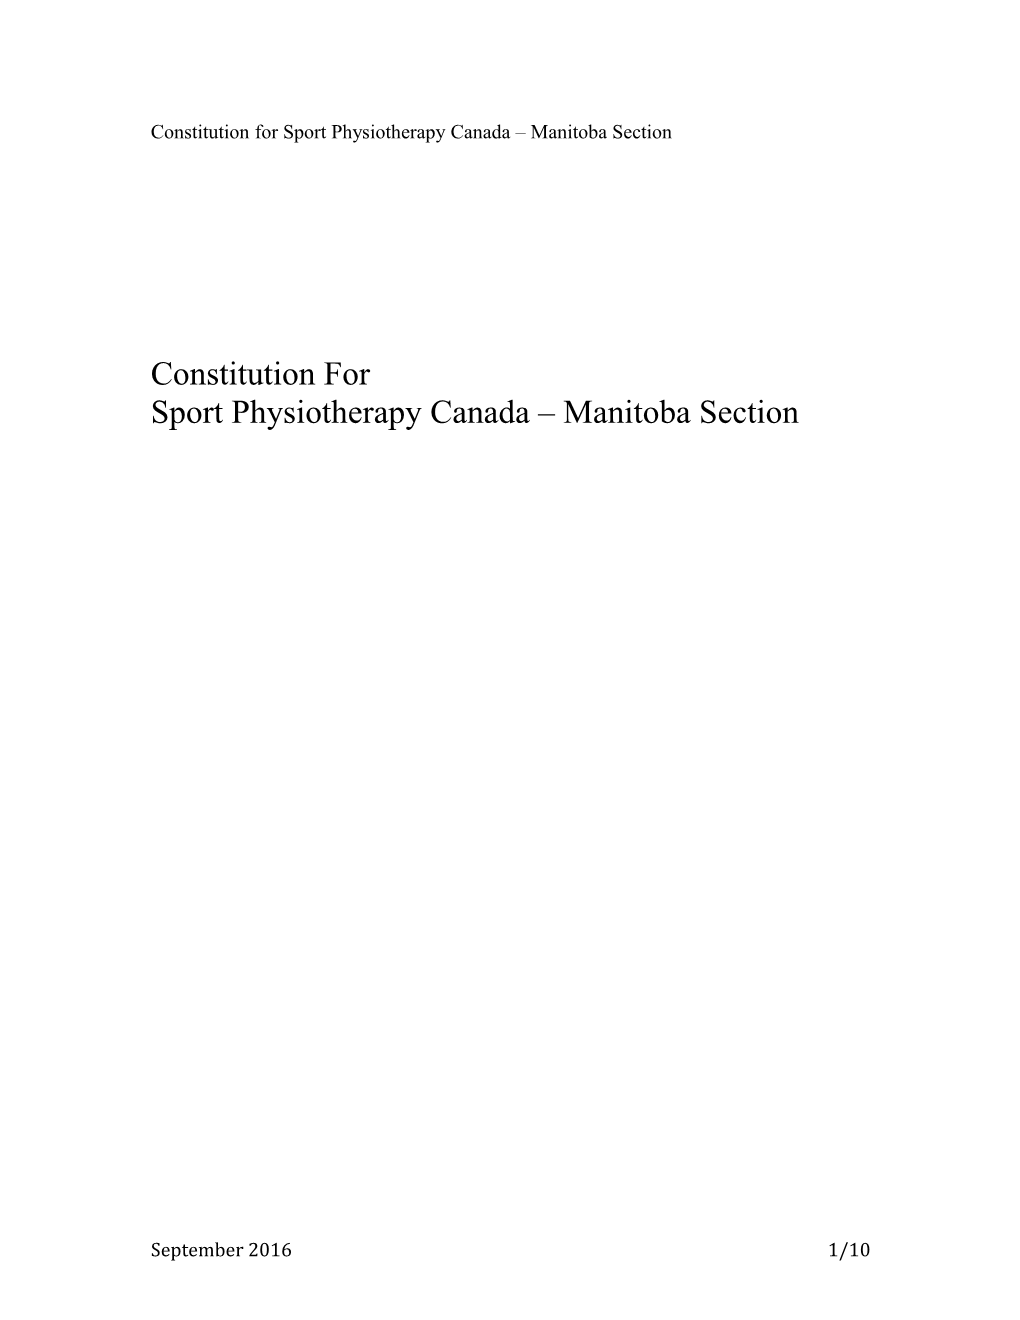 Constitution for Sport Physiotherapy Canada Manitoba Section